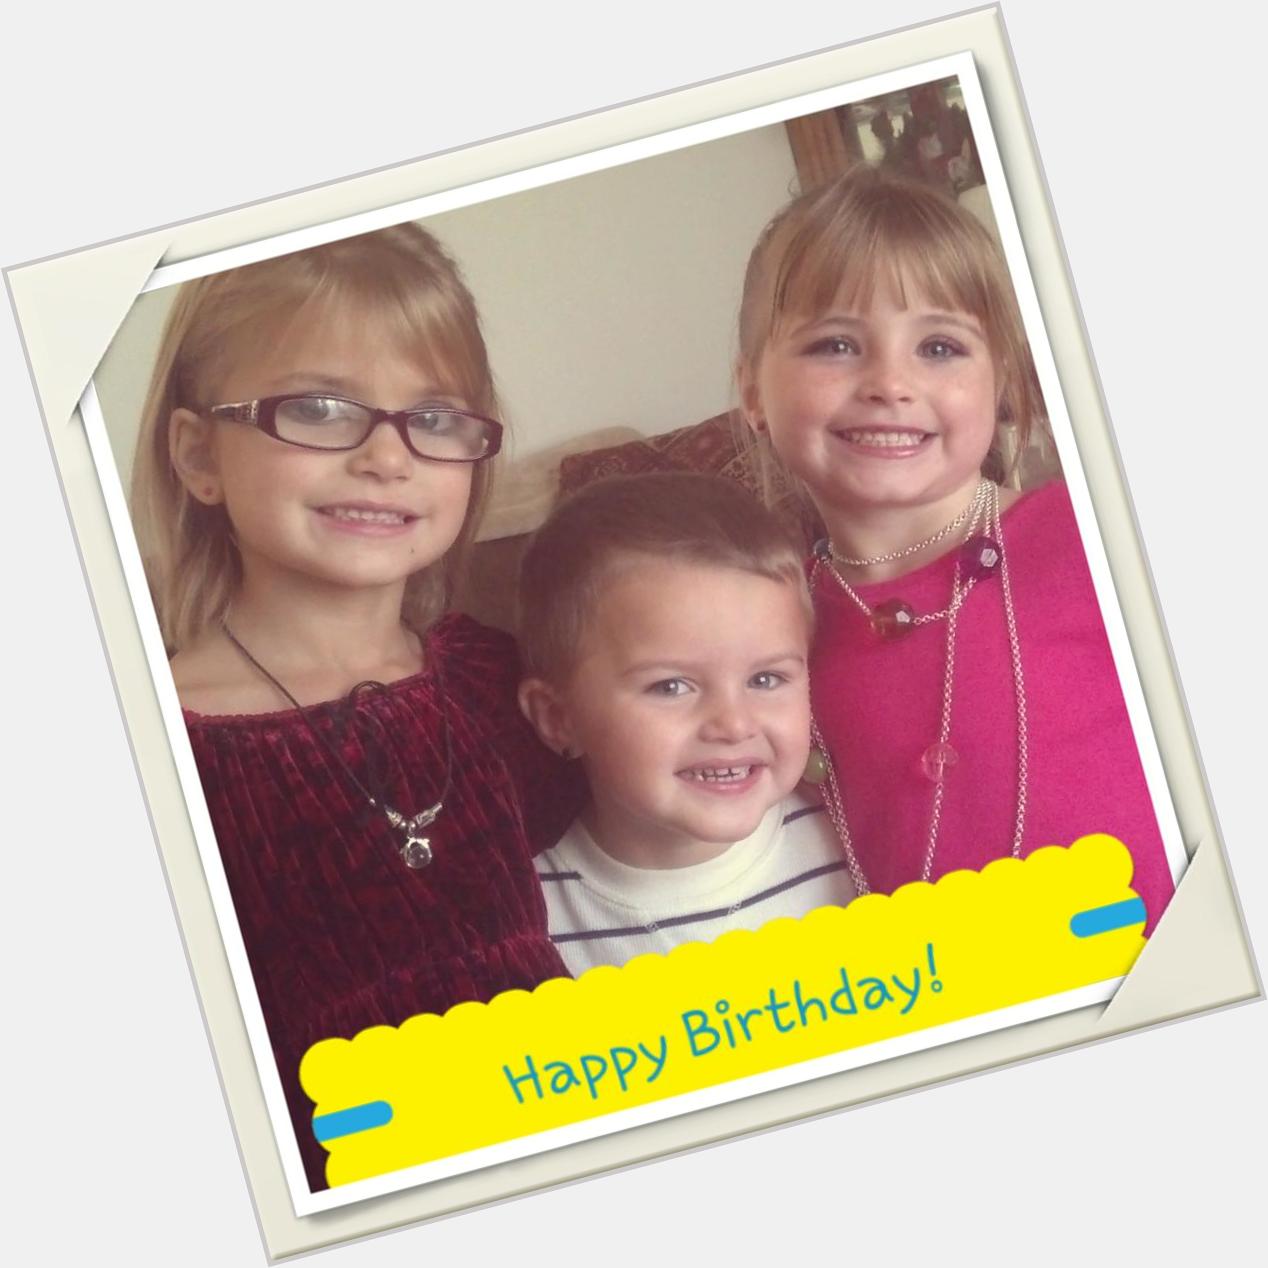  they wanted to send you another Happy Birthday! We love you Boy George! Love Madi, Colt & Hayleigh 